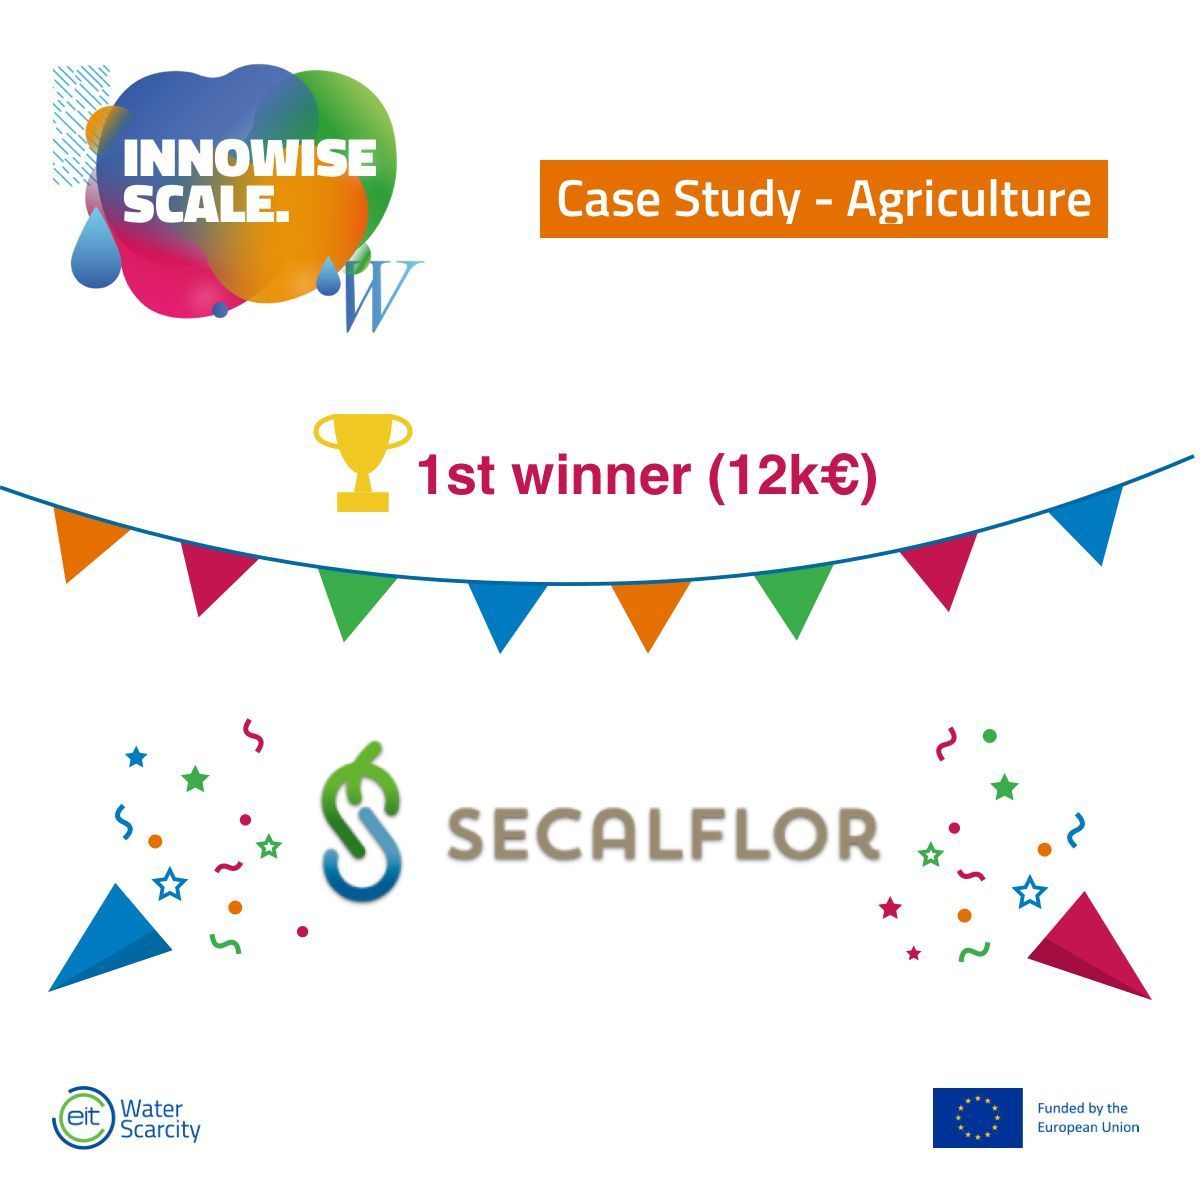 We did it again: 1st prize at InnoWise Scale